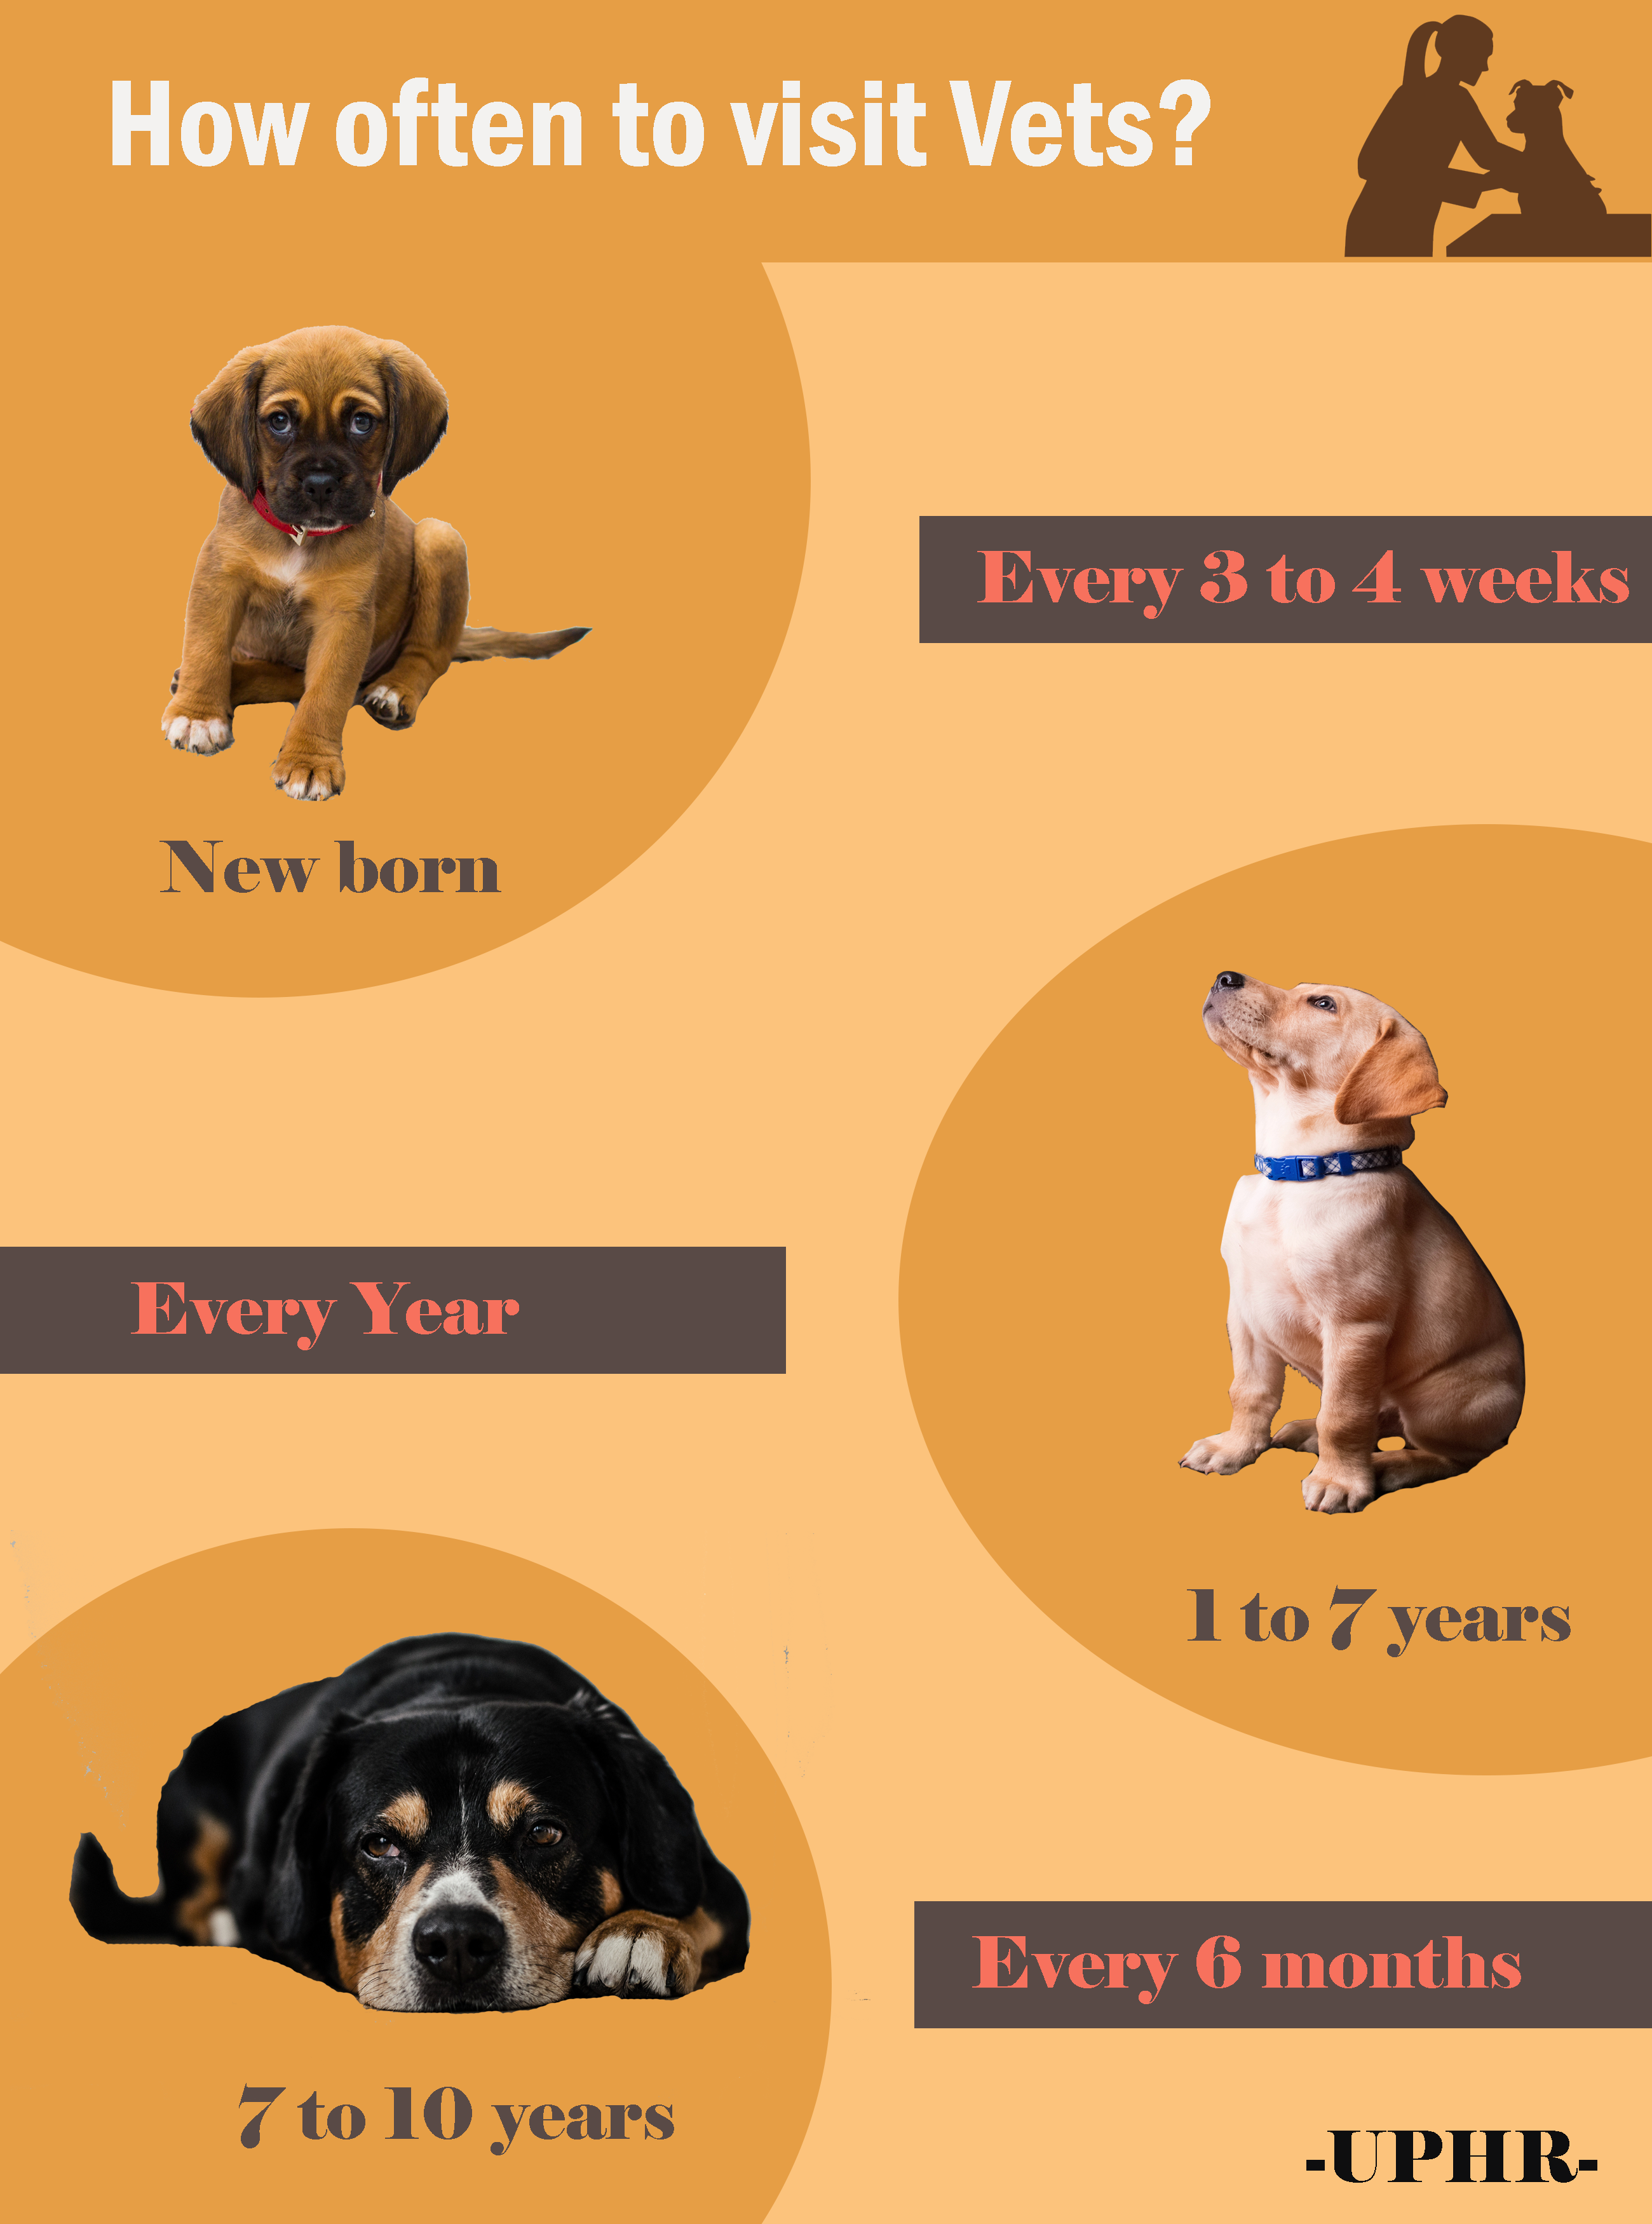 recommended frequency of vet check-ups for pets at different life stages